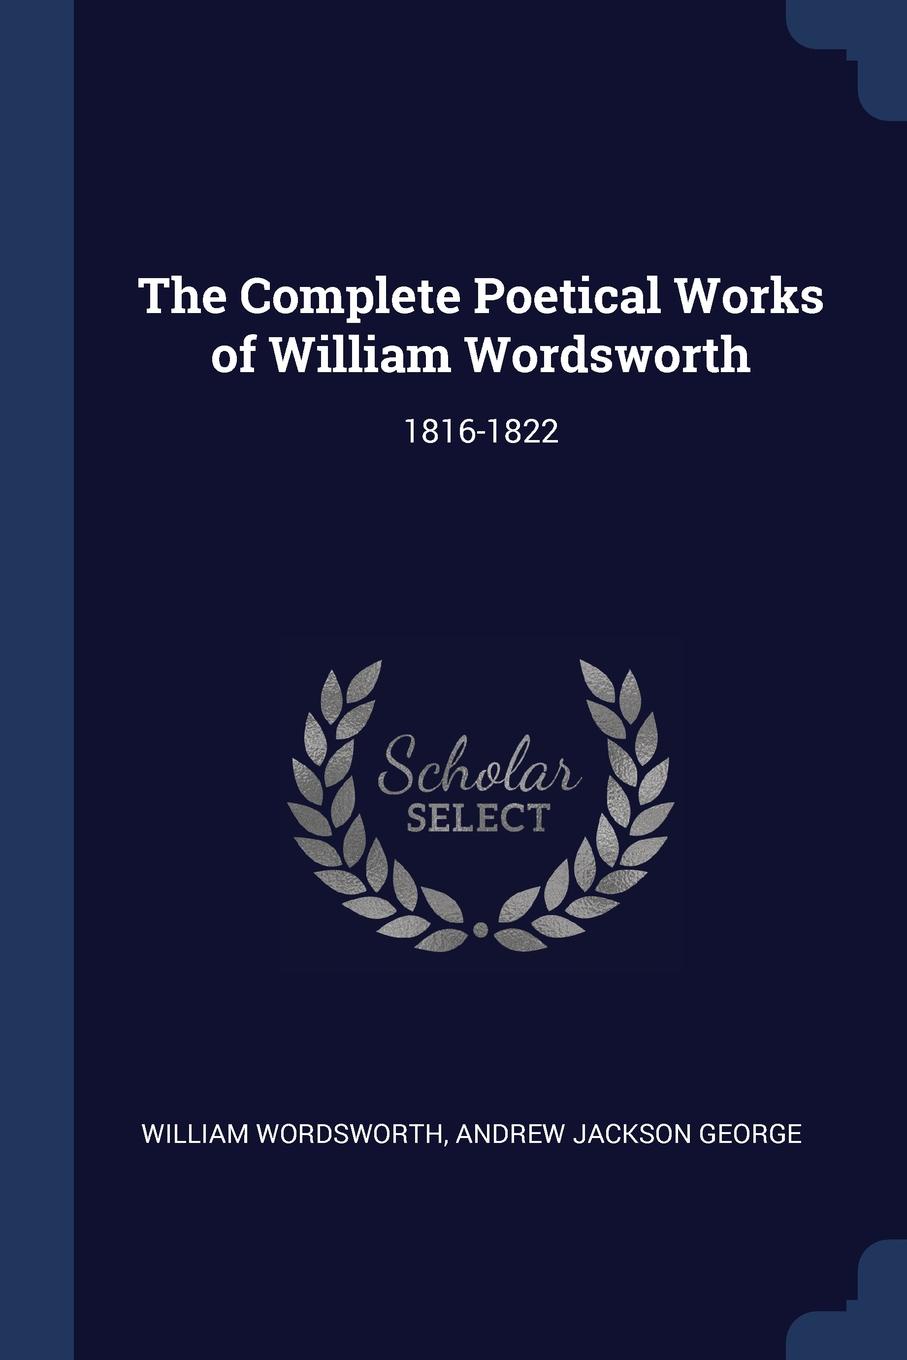 The Complete Poetical Works of William Wordsworth. 1816-1822